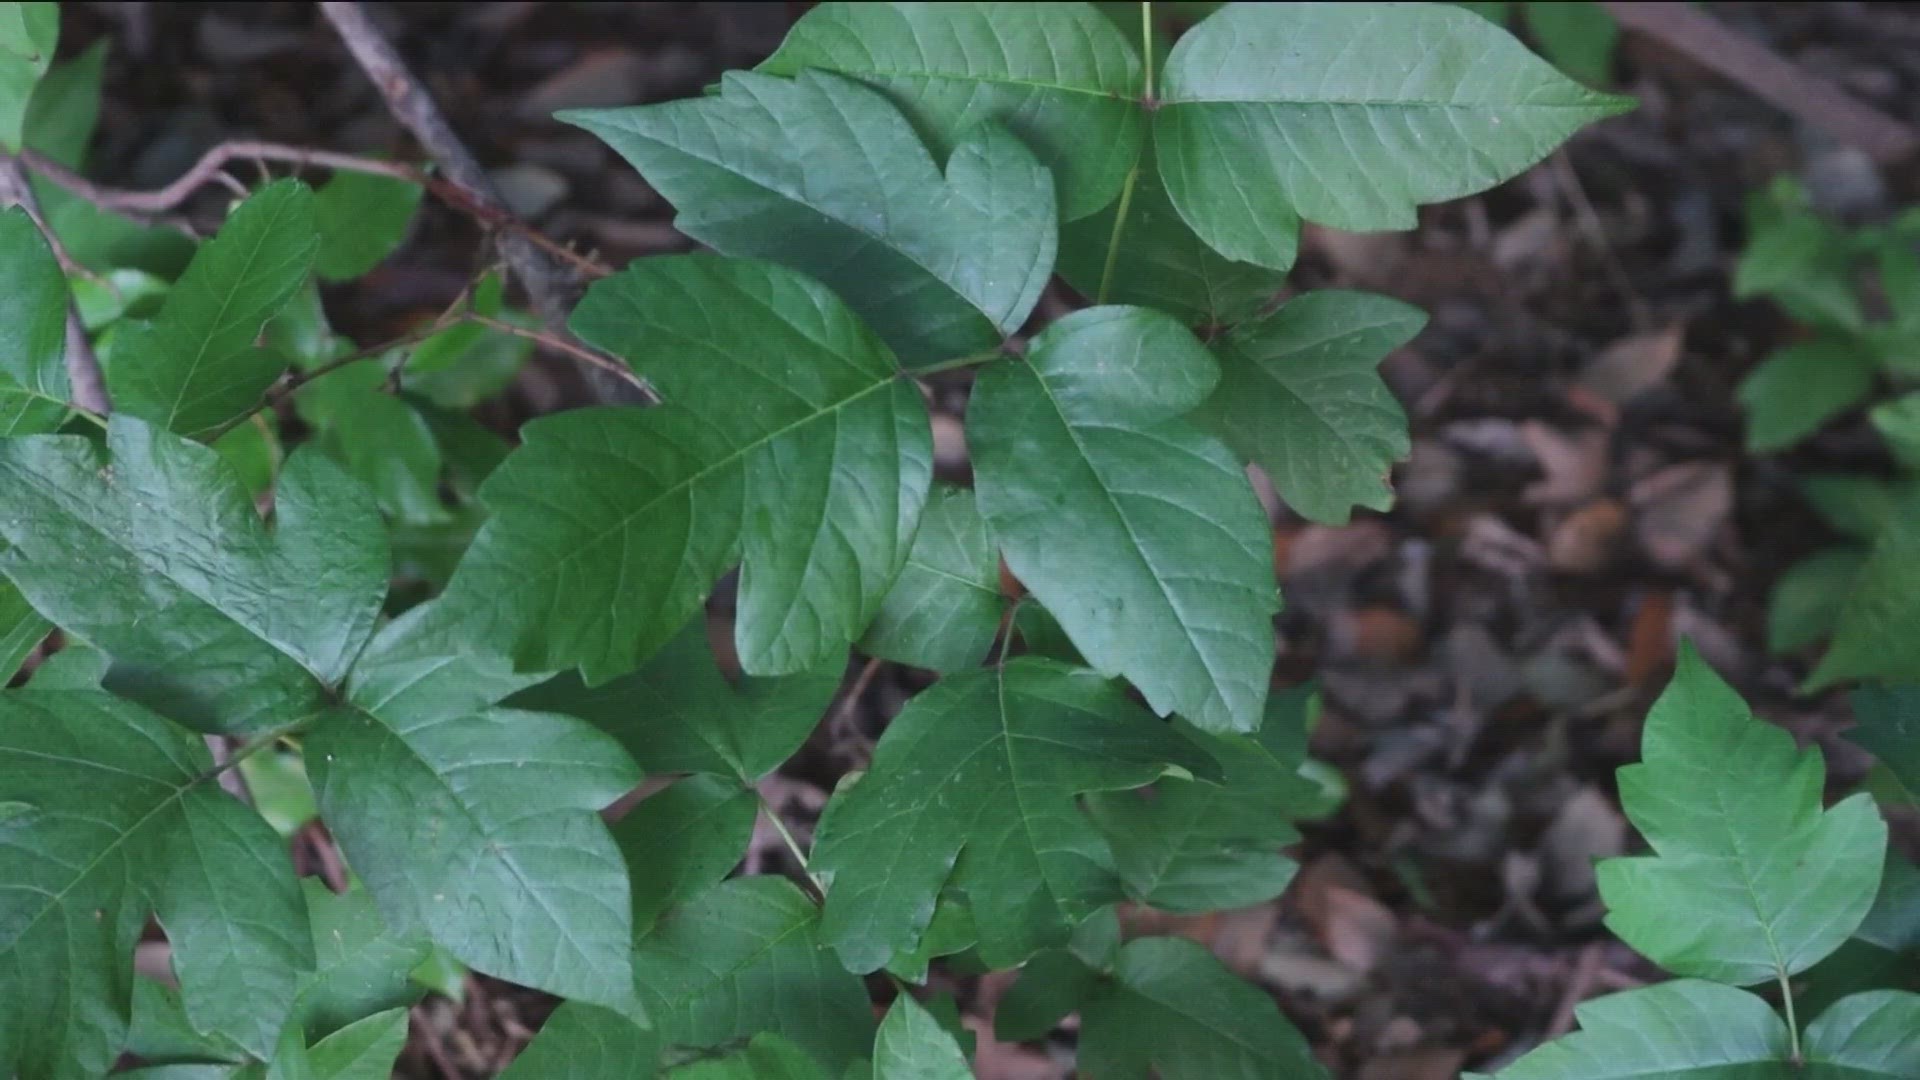 Because poison ivy is a native Texas plant, the City of Austin doesn't remove it - they just make sure it stays of the trails.